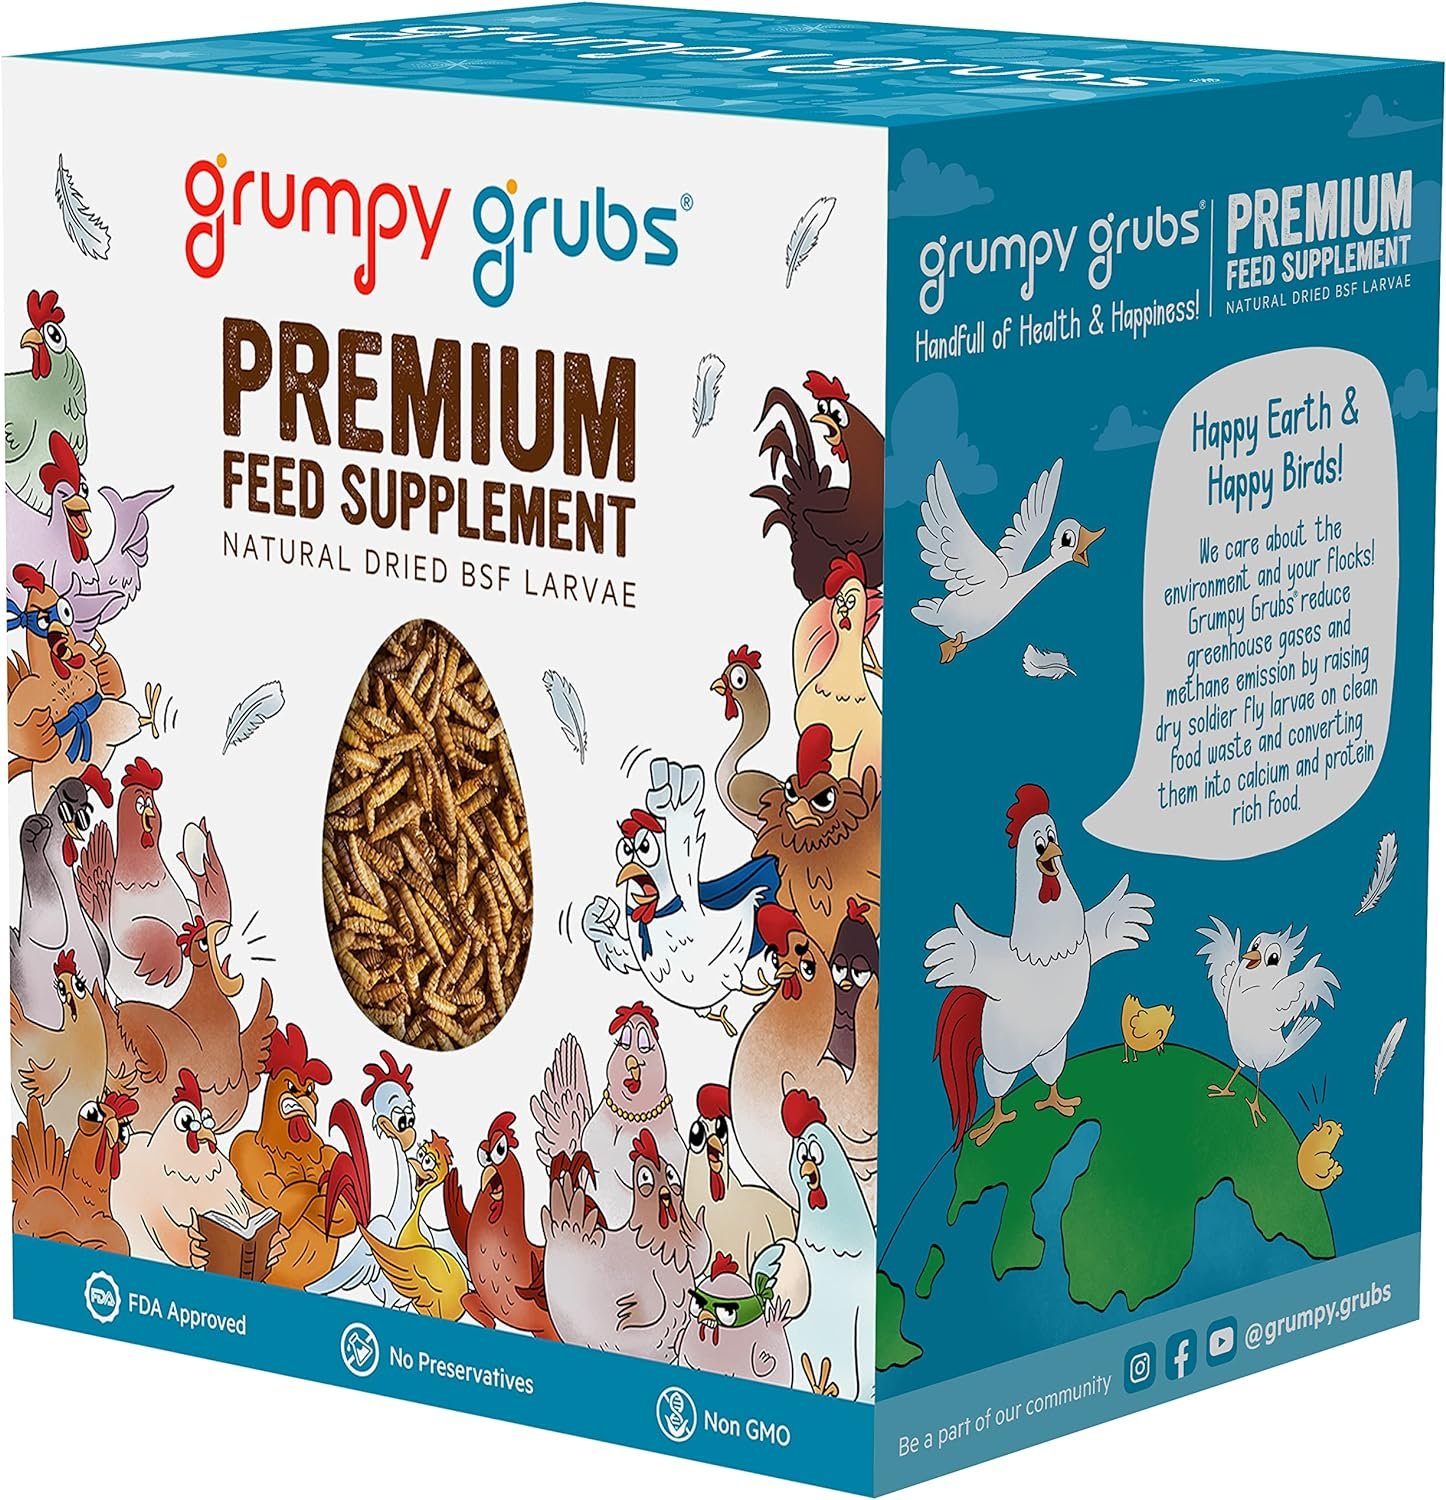 Grumpy Grubs Premium (5lbs) - Superior to Mealworms - Dried Black Solider Fly Larvae Treats for Hens Ducks Wild Birds, Calcium Rich and Healthy High Protein Chicken Treats